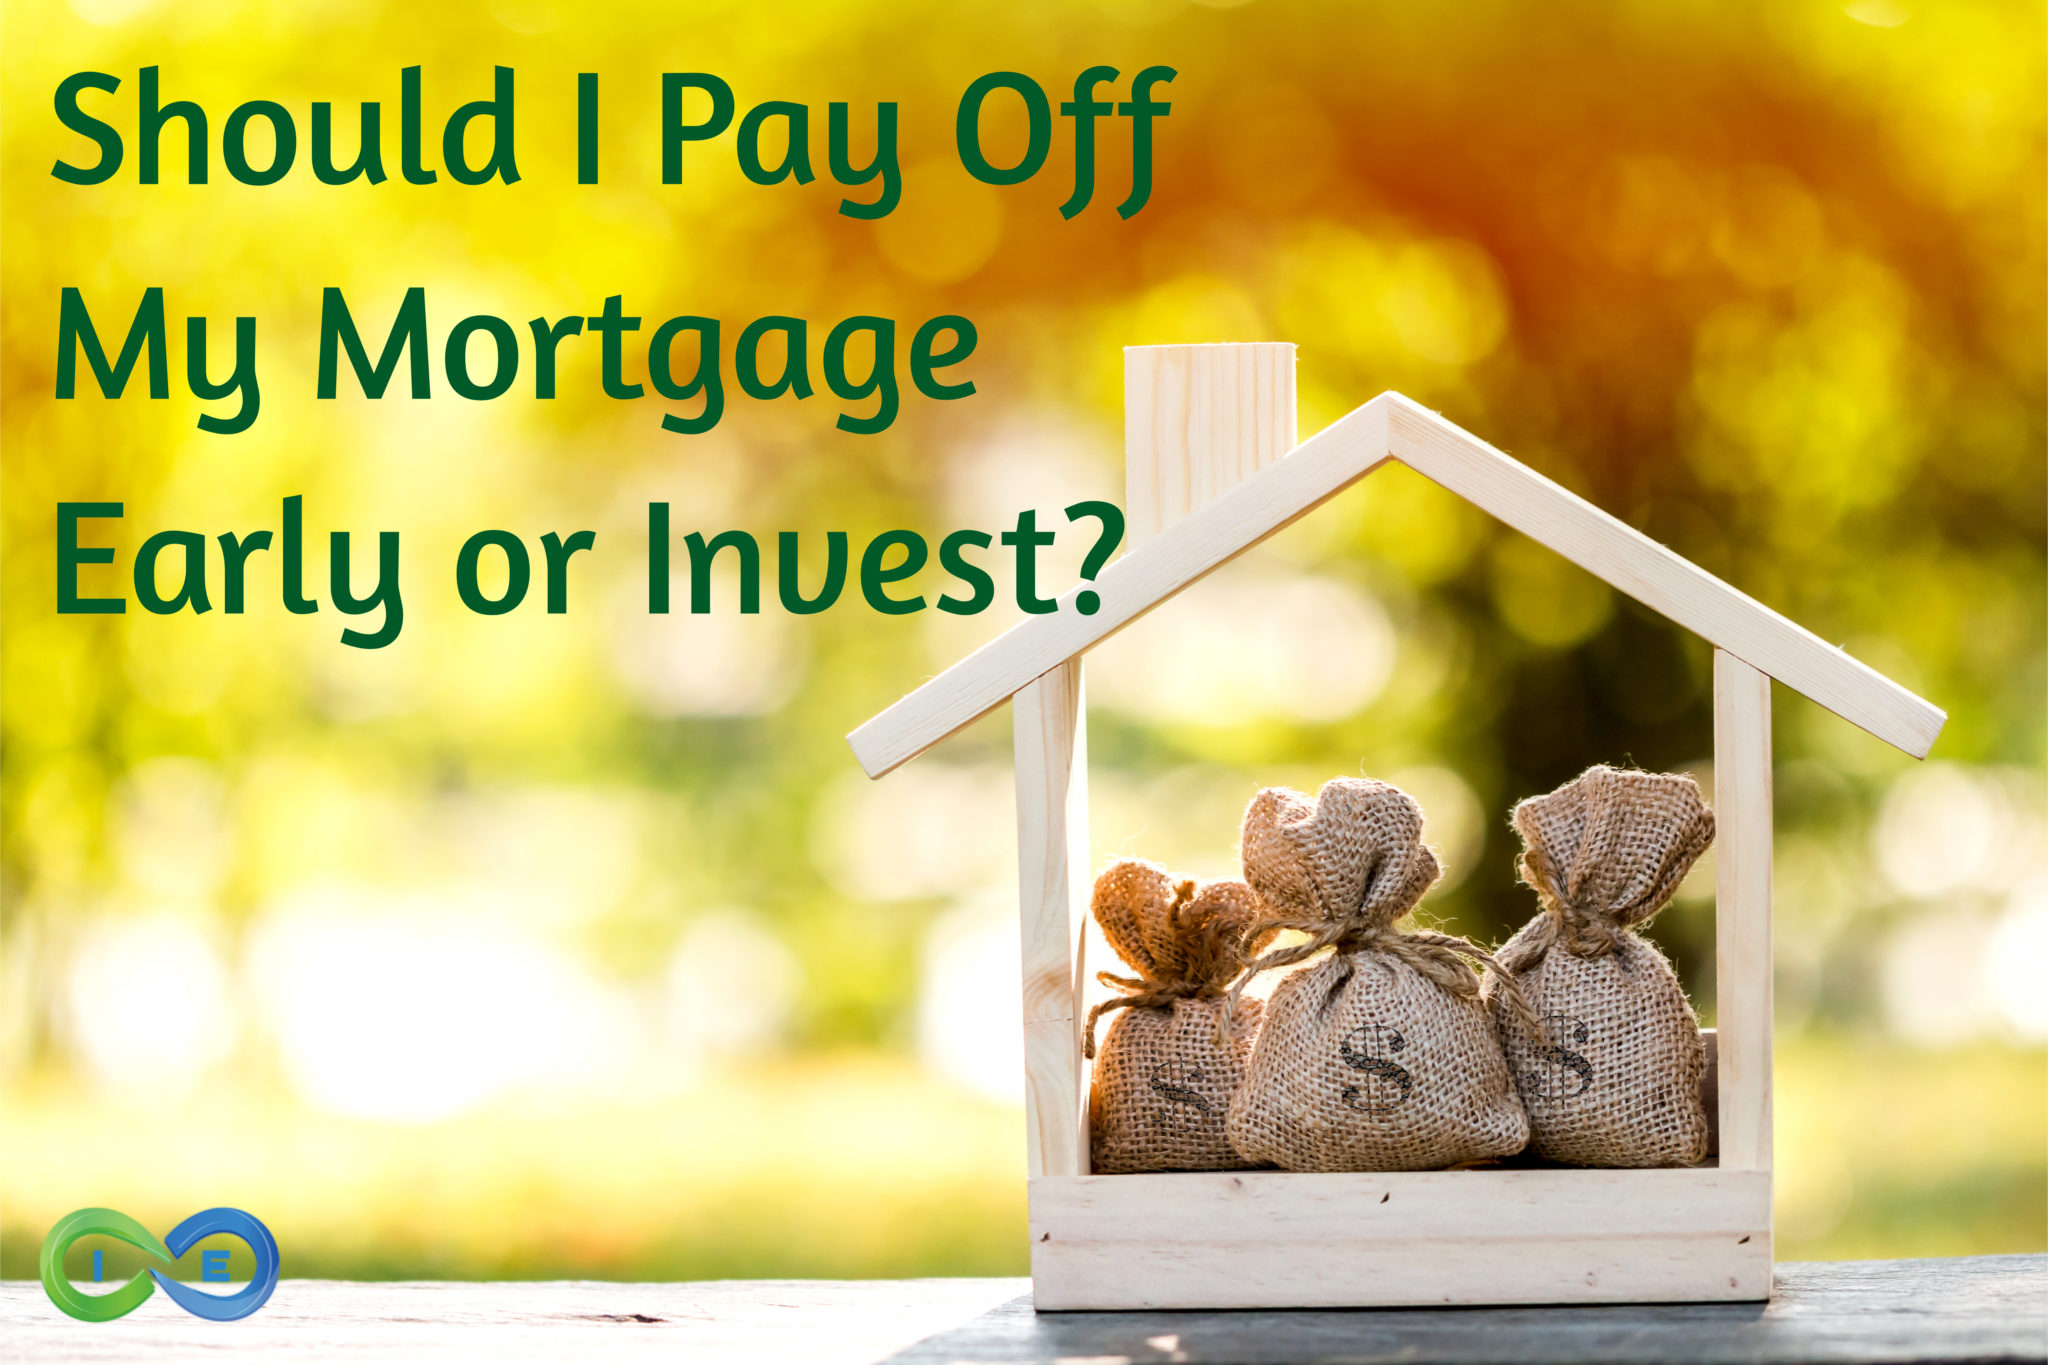 Pay Off Mortgage or Invest? Top Pros and Cons You Should Consider